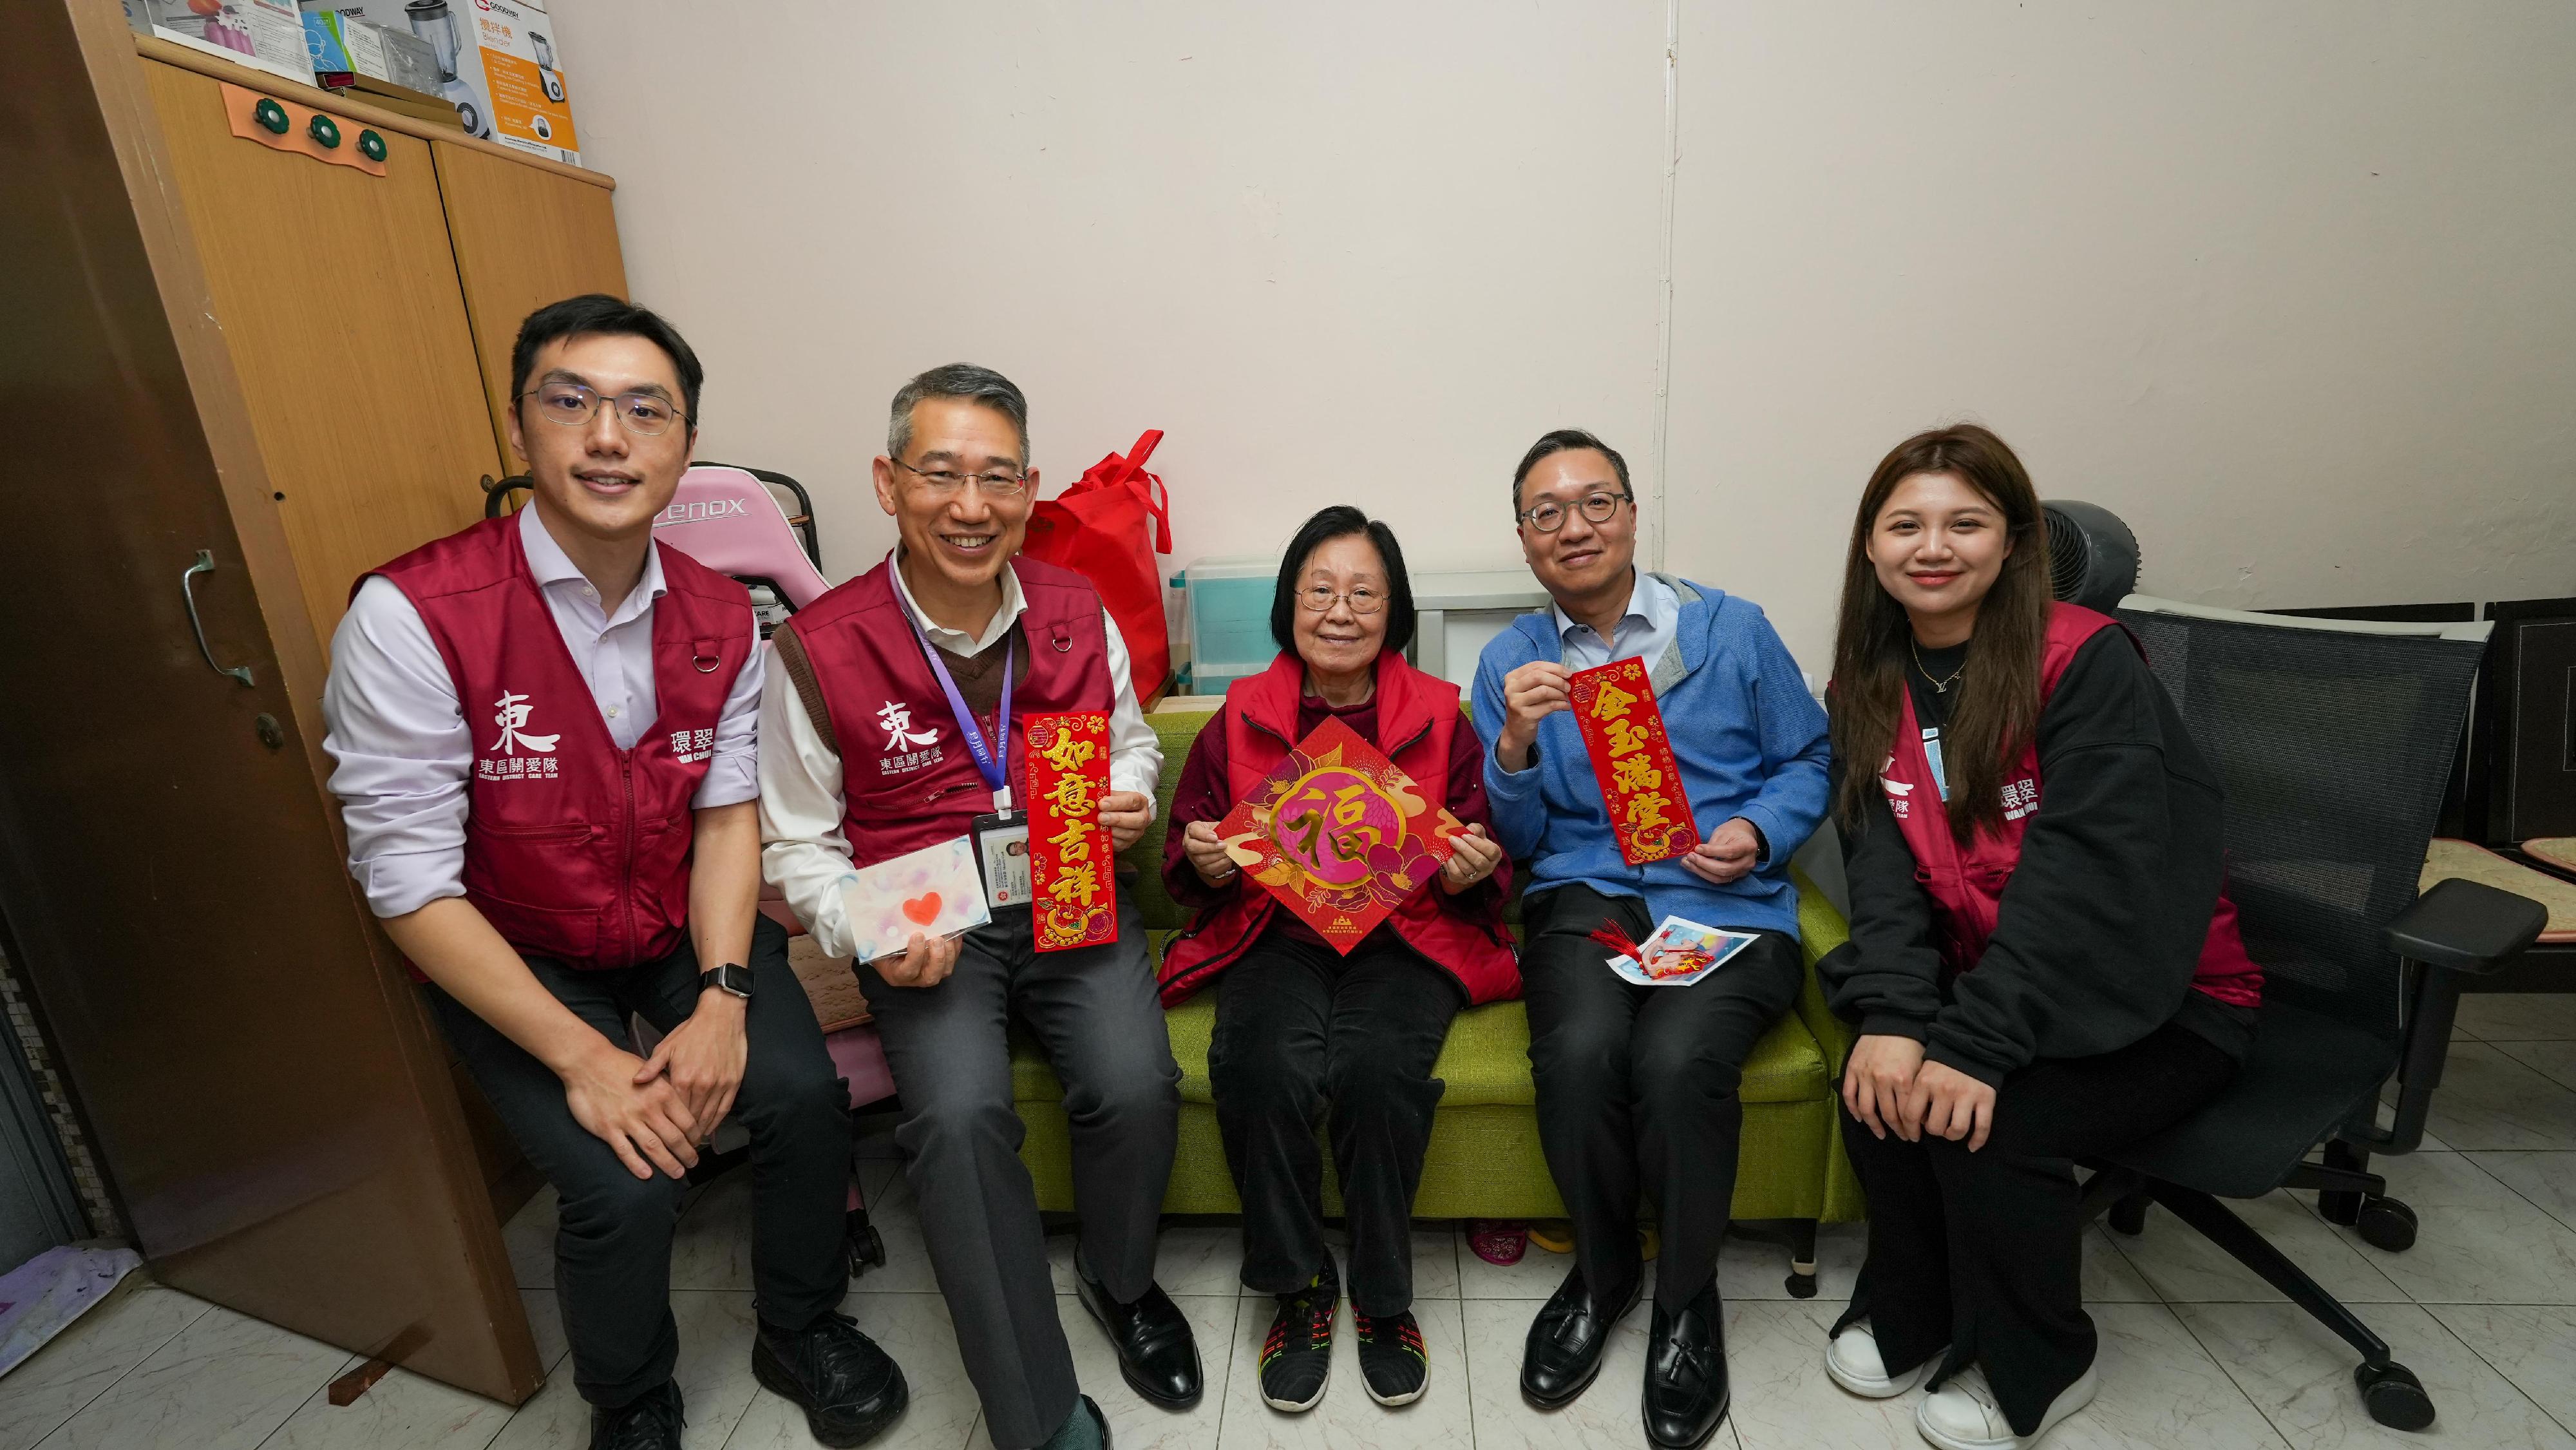 The Secretary for Justice, Mr Paul Lam, SC, today (February 7) visited elderly people living in Wan Tsui Estate, Chai Wan, to chat with them and distribute blessing bags in celebration of the Chinese New Year. Photo shows Mr Lam (second right), together with the District Officer (Eastern), Mr Simon Chan (second left), an Eastern District Council member and a representative from the Care Team (Eastern), visiting an elderly person living alone in Wan Tsui Estate.